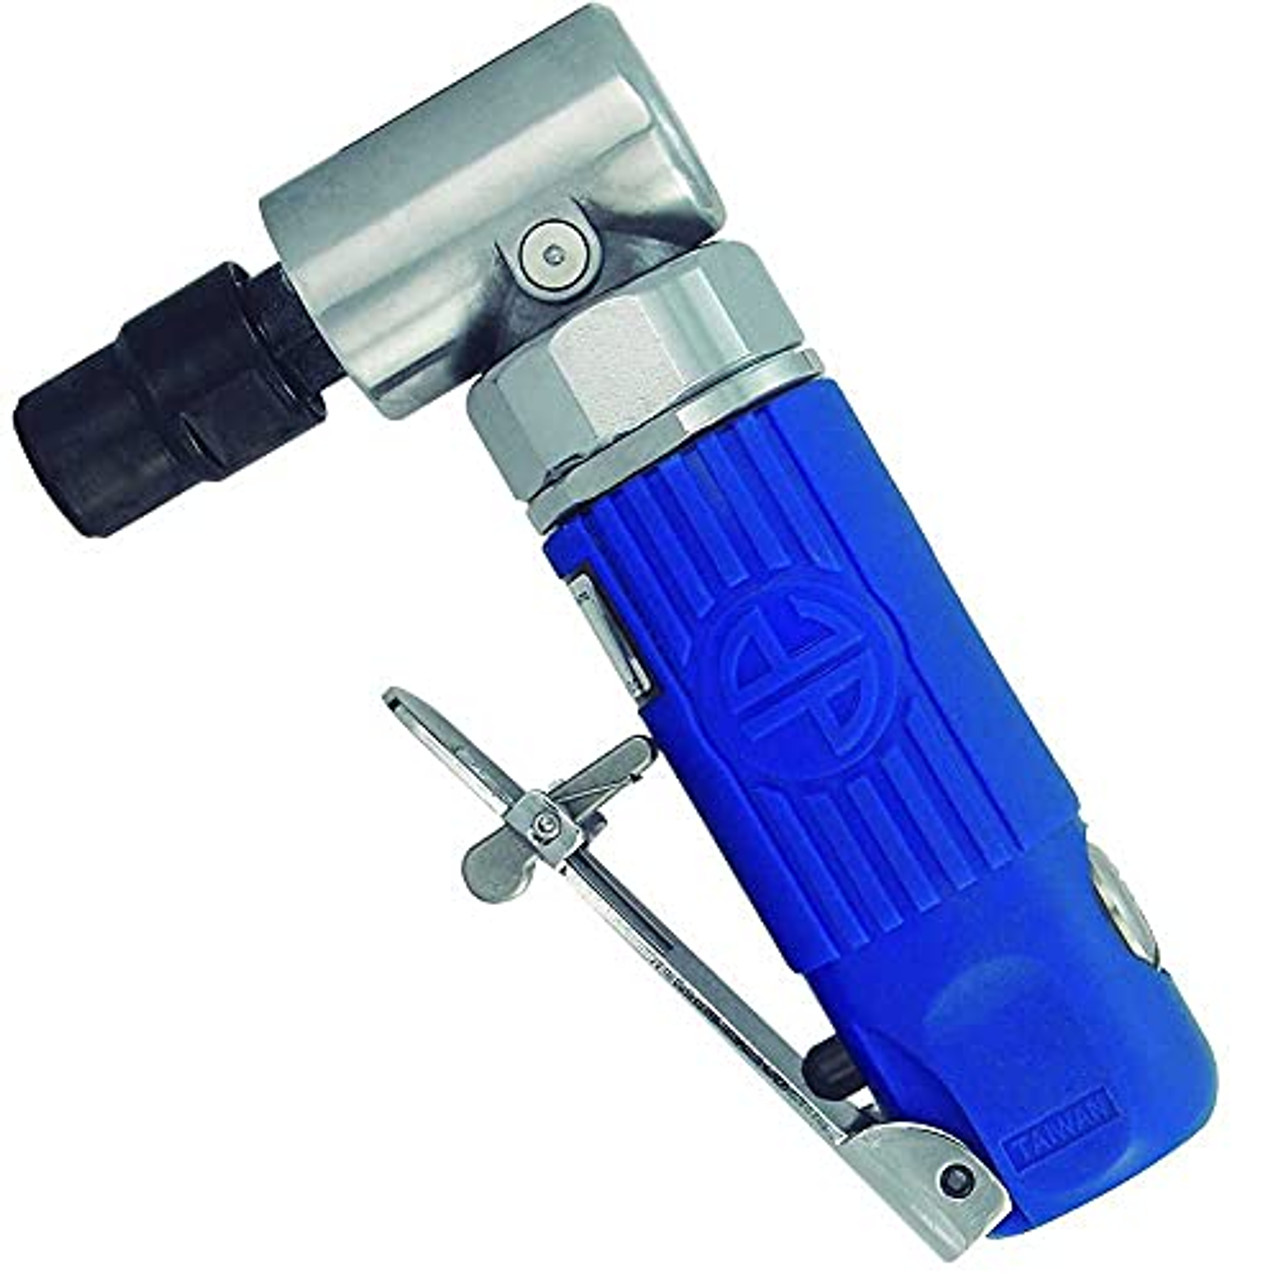 Astro Pneumatic 1240 1/4 In Die Grinder - 90 Degree Angle Head